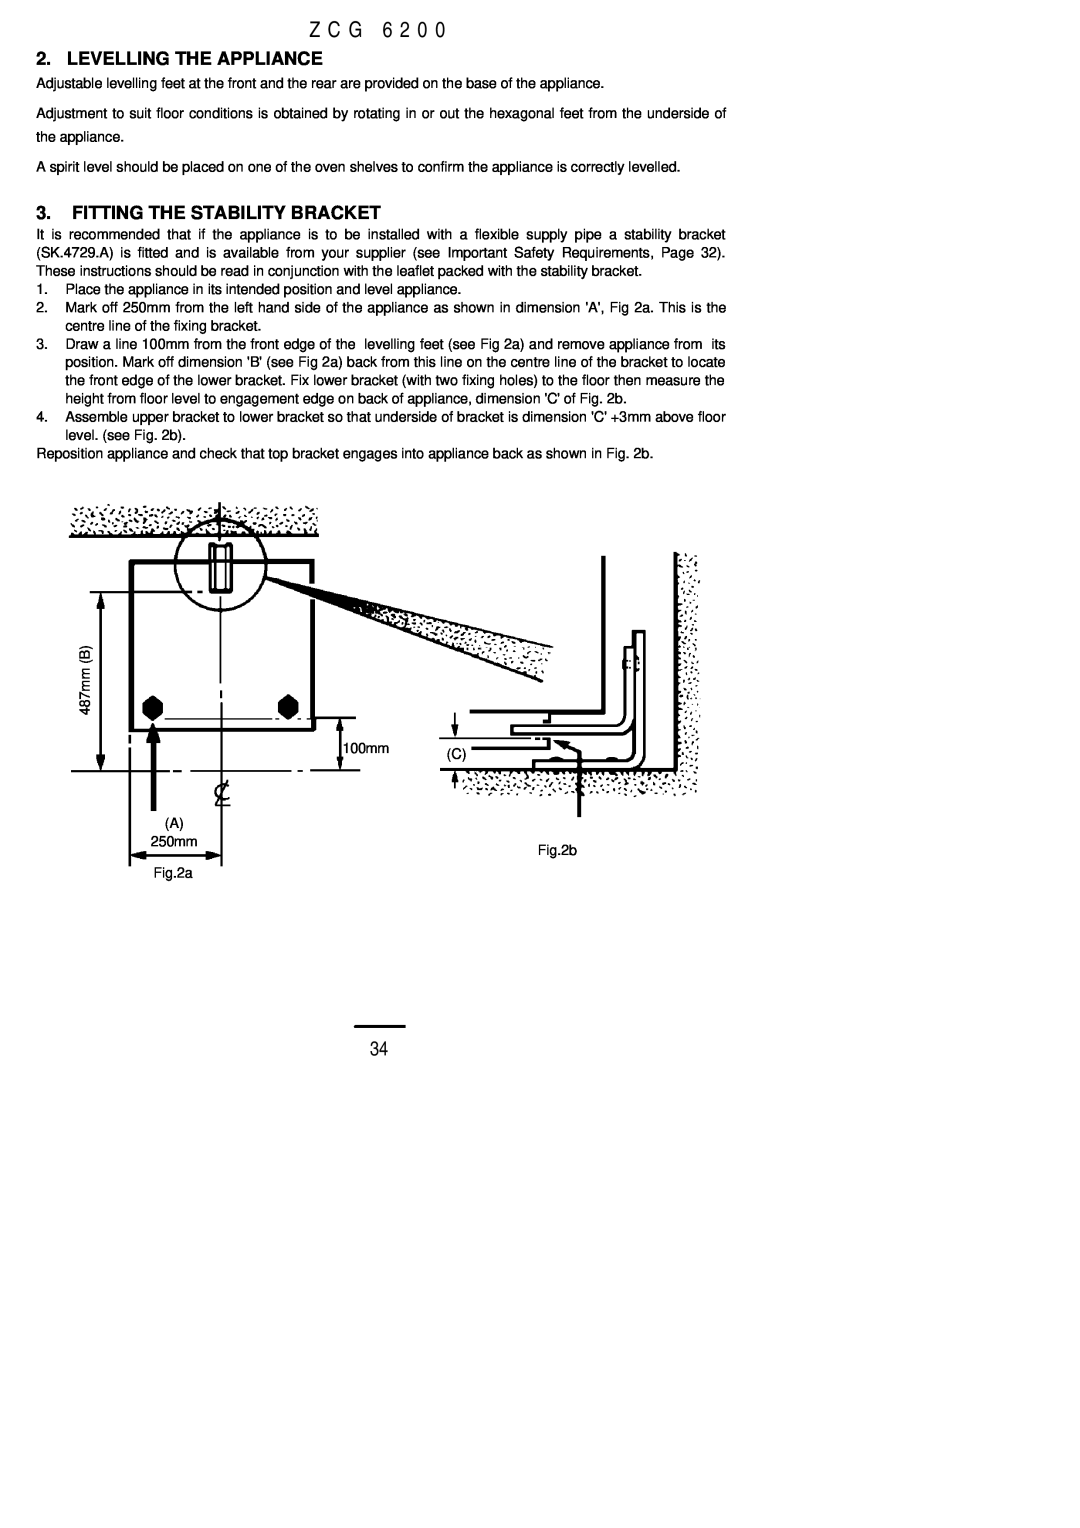 Zanussi ZCG 6200 installation instructions Z C G, Levelling The Appliance, Fitting The Stability Bracket 